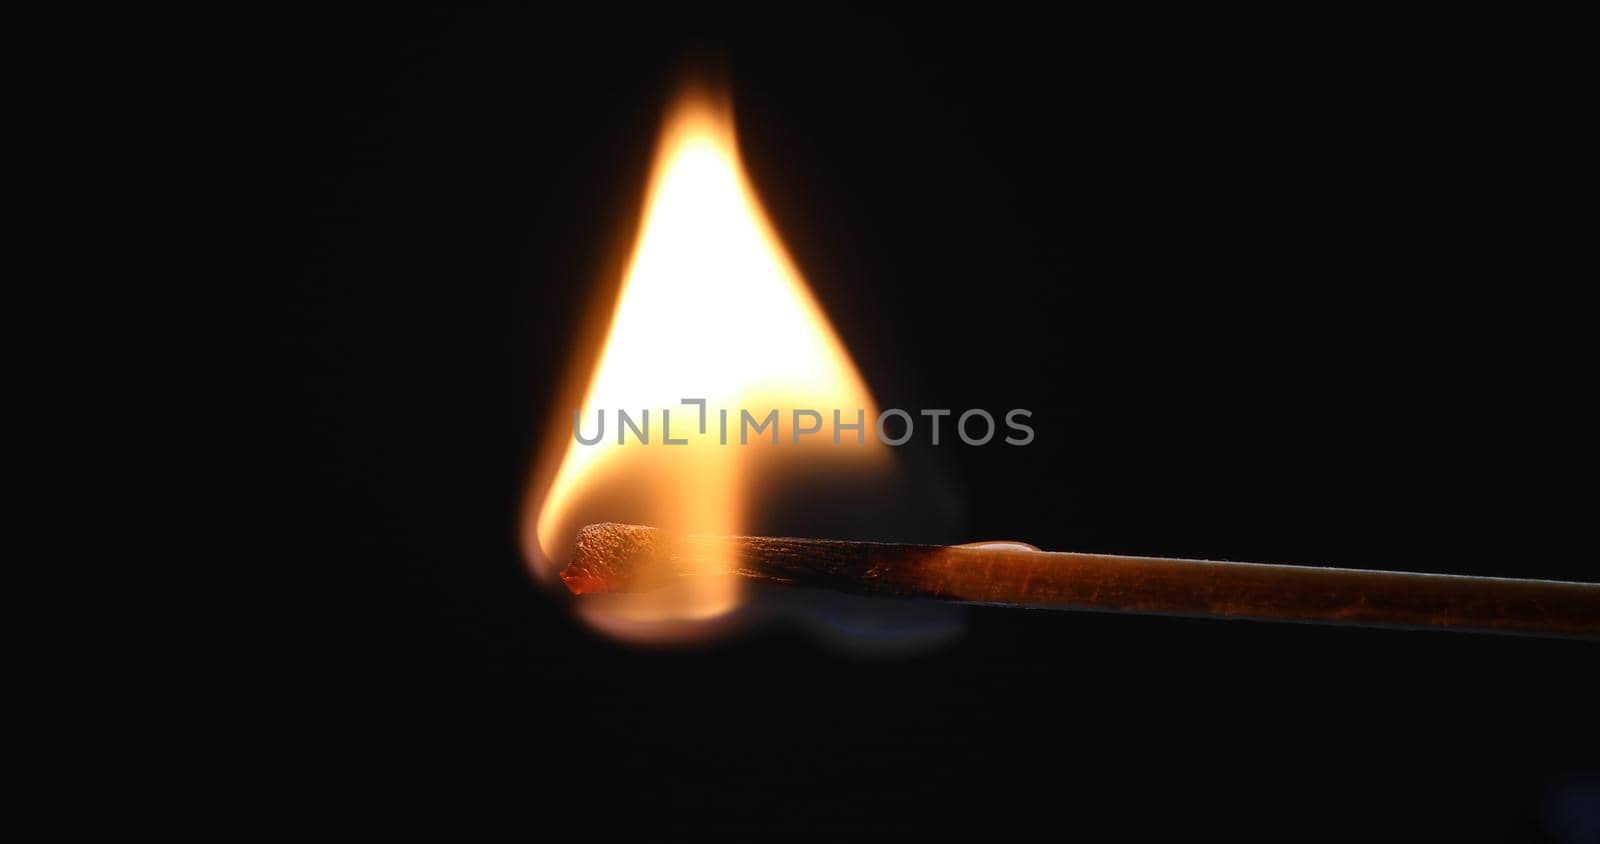 Matchstick burns with a flame and bends upward blackening